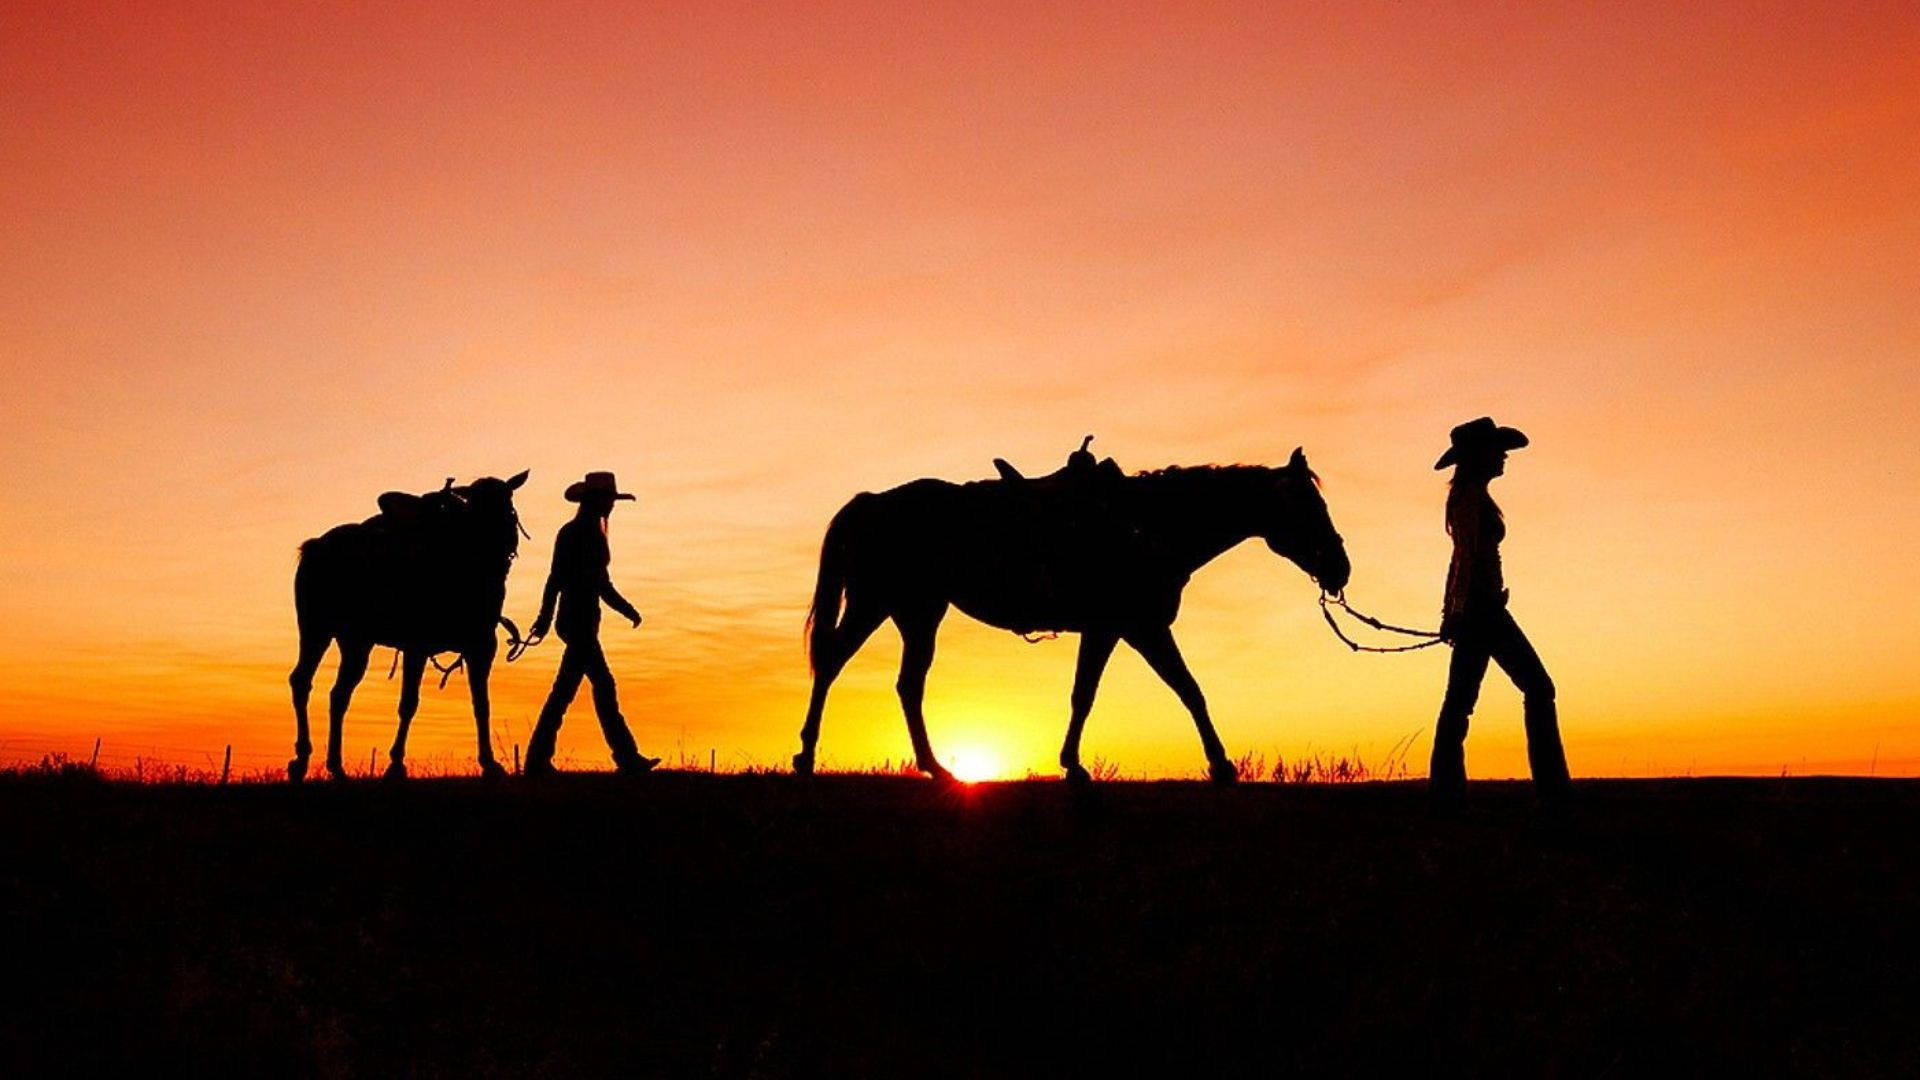 Walking Cowgirl And Horses Wallpaper